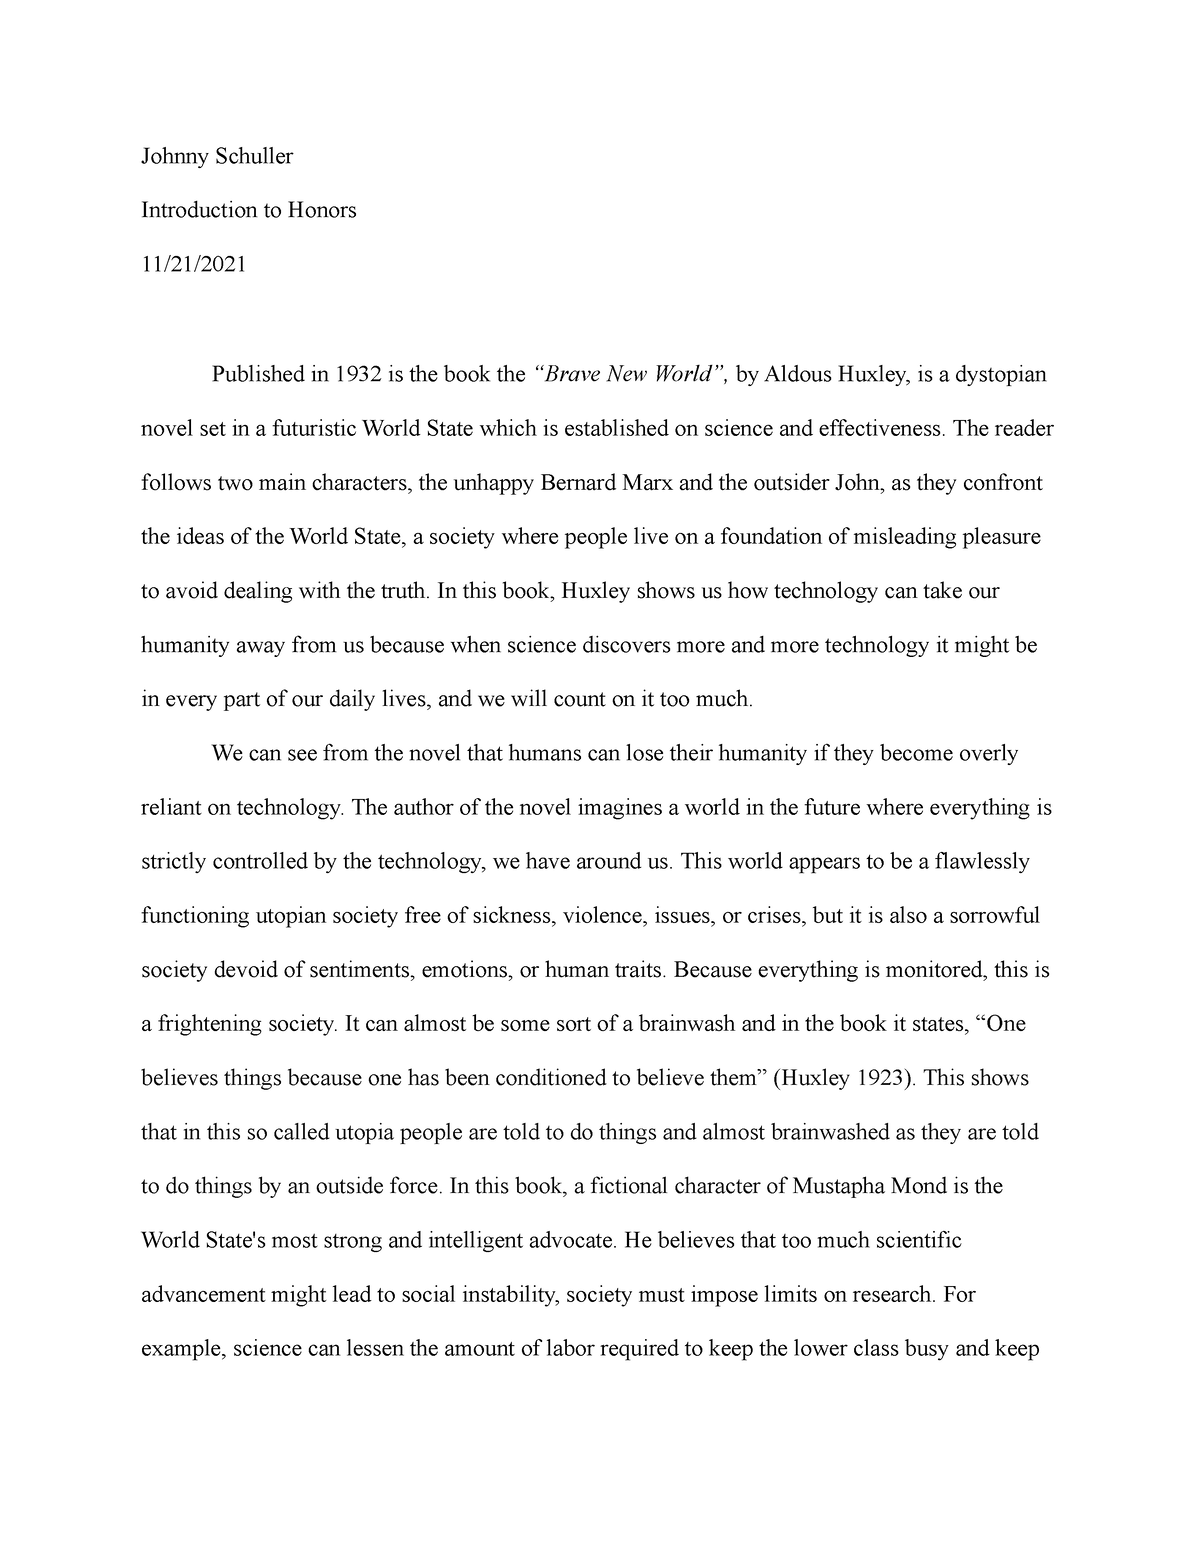 honors college essay